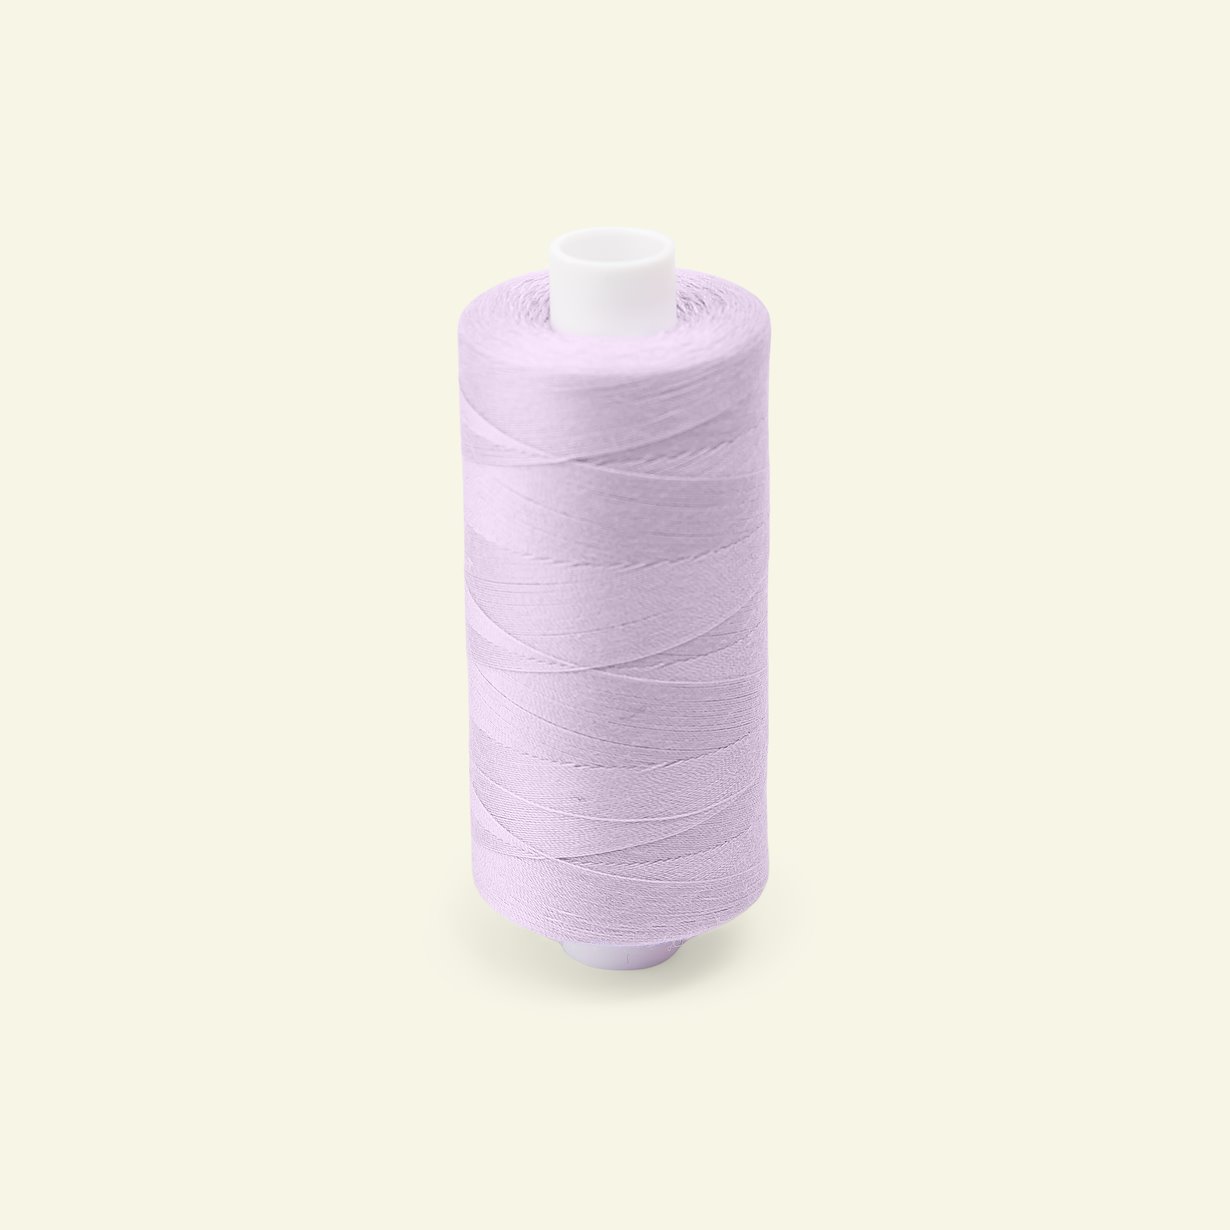 Sewing thread neon pink 1000m